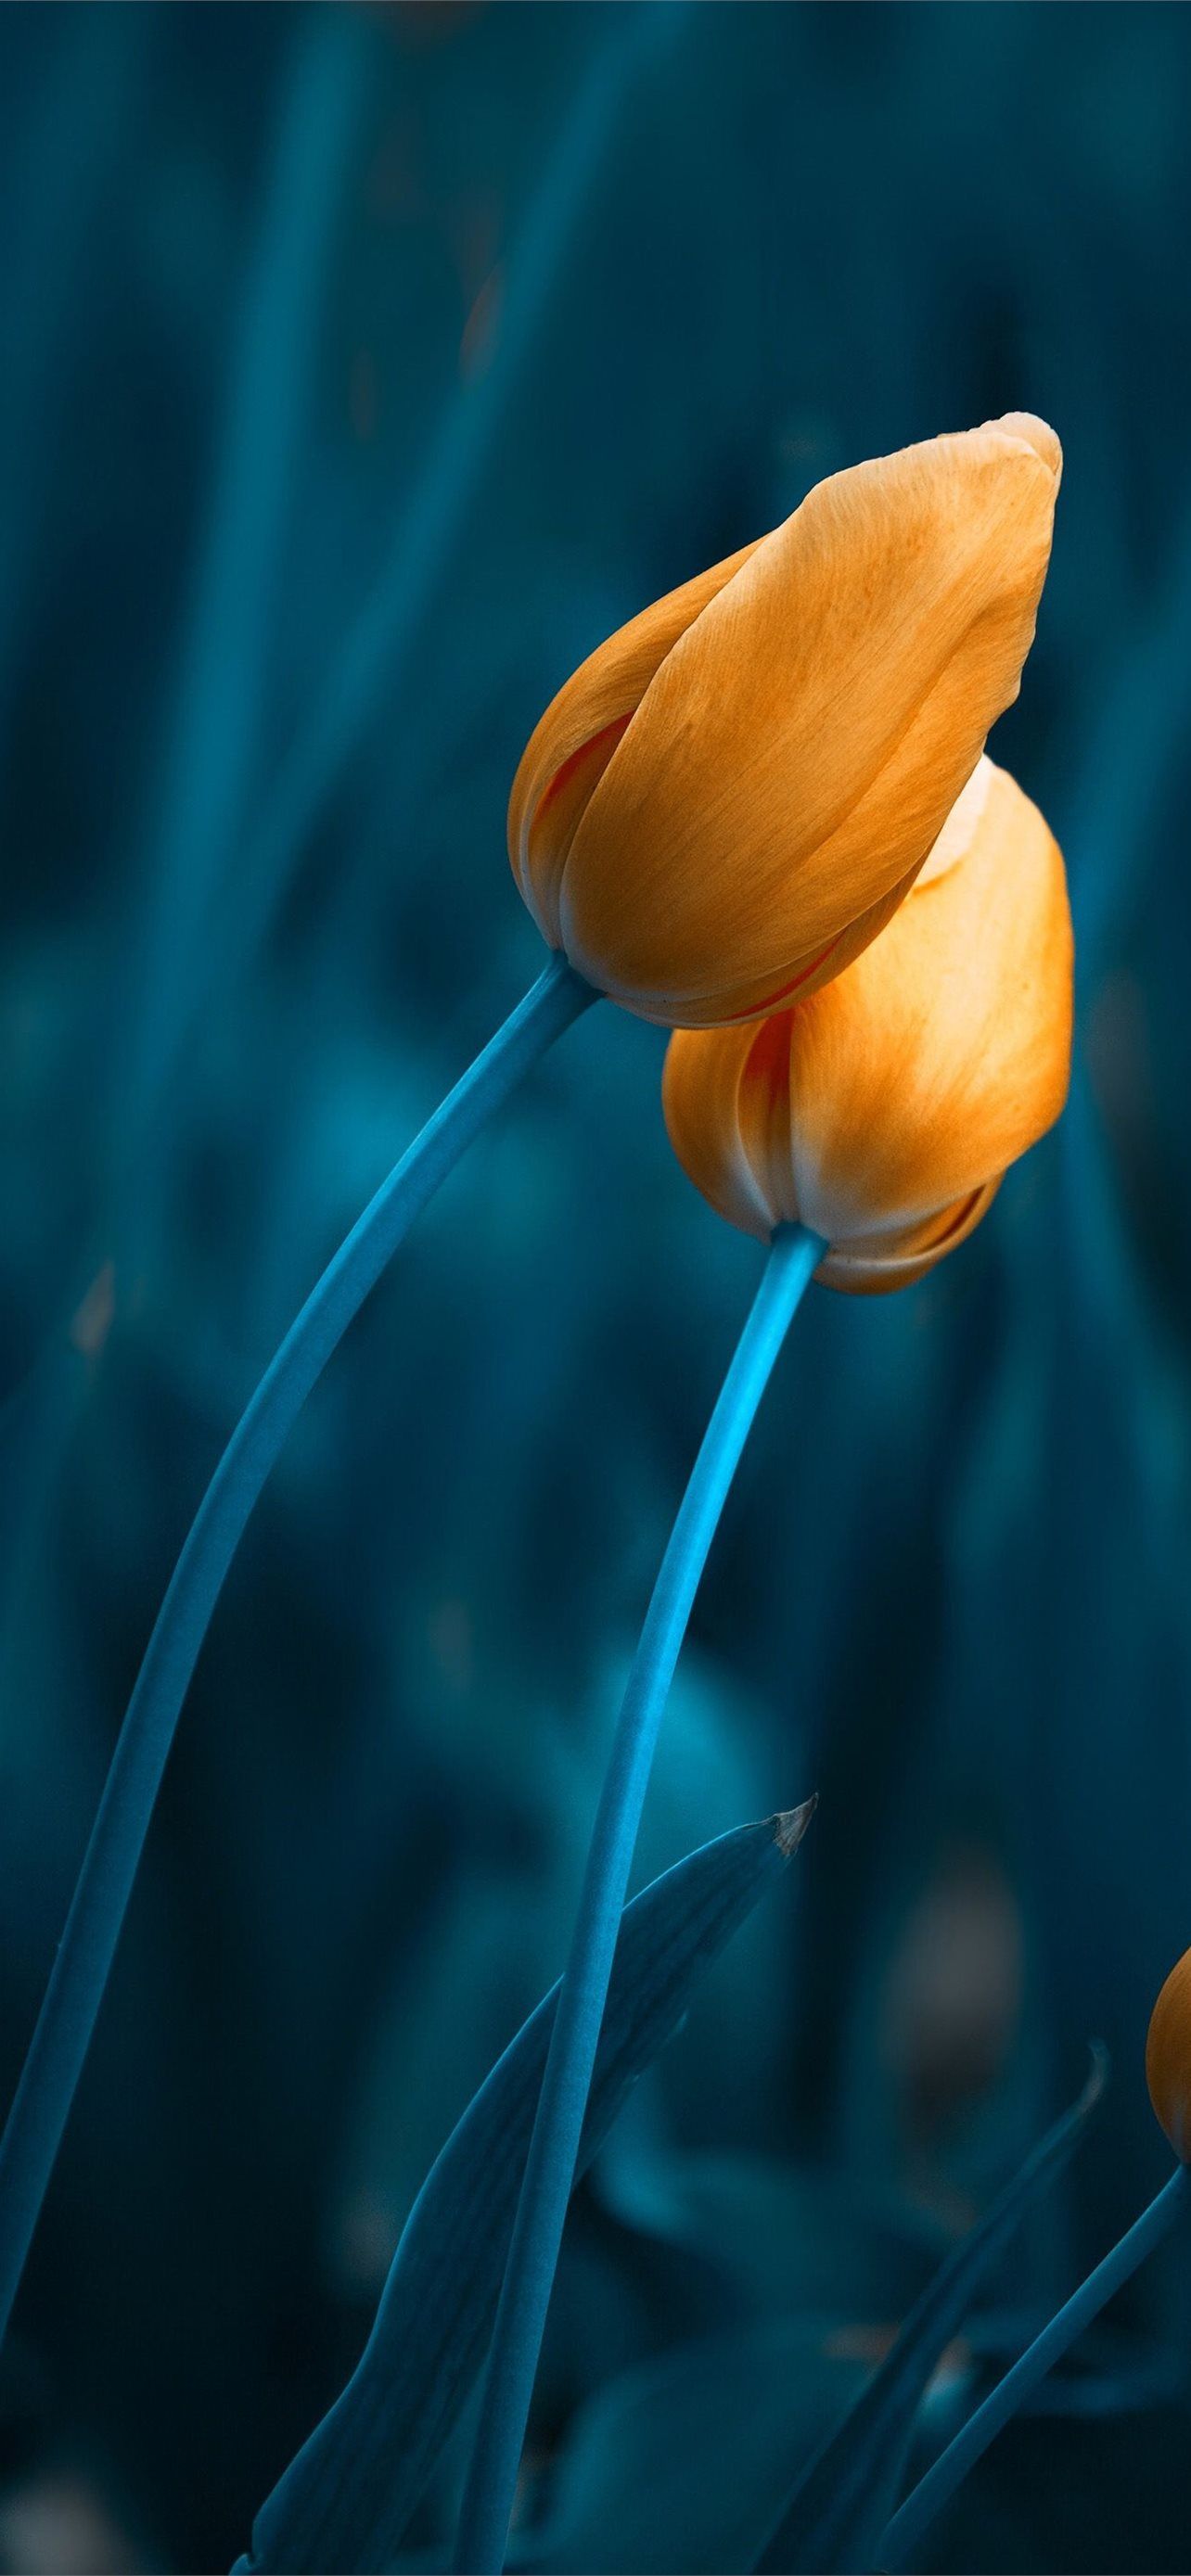 A yellow tulip with a blue background - Tulip